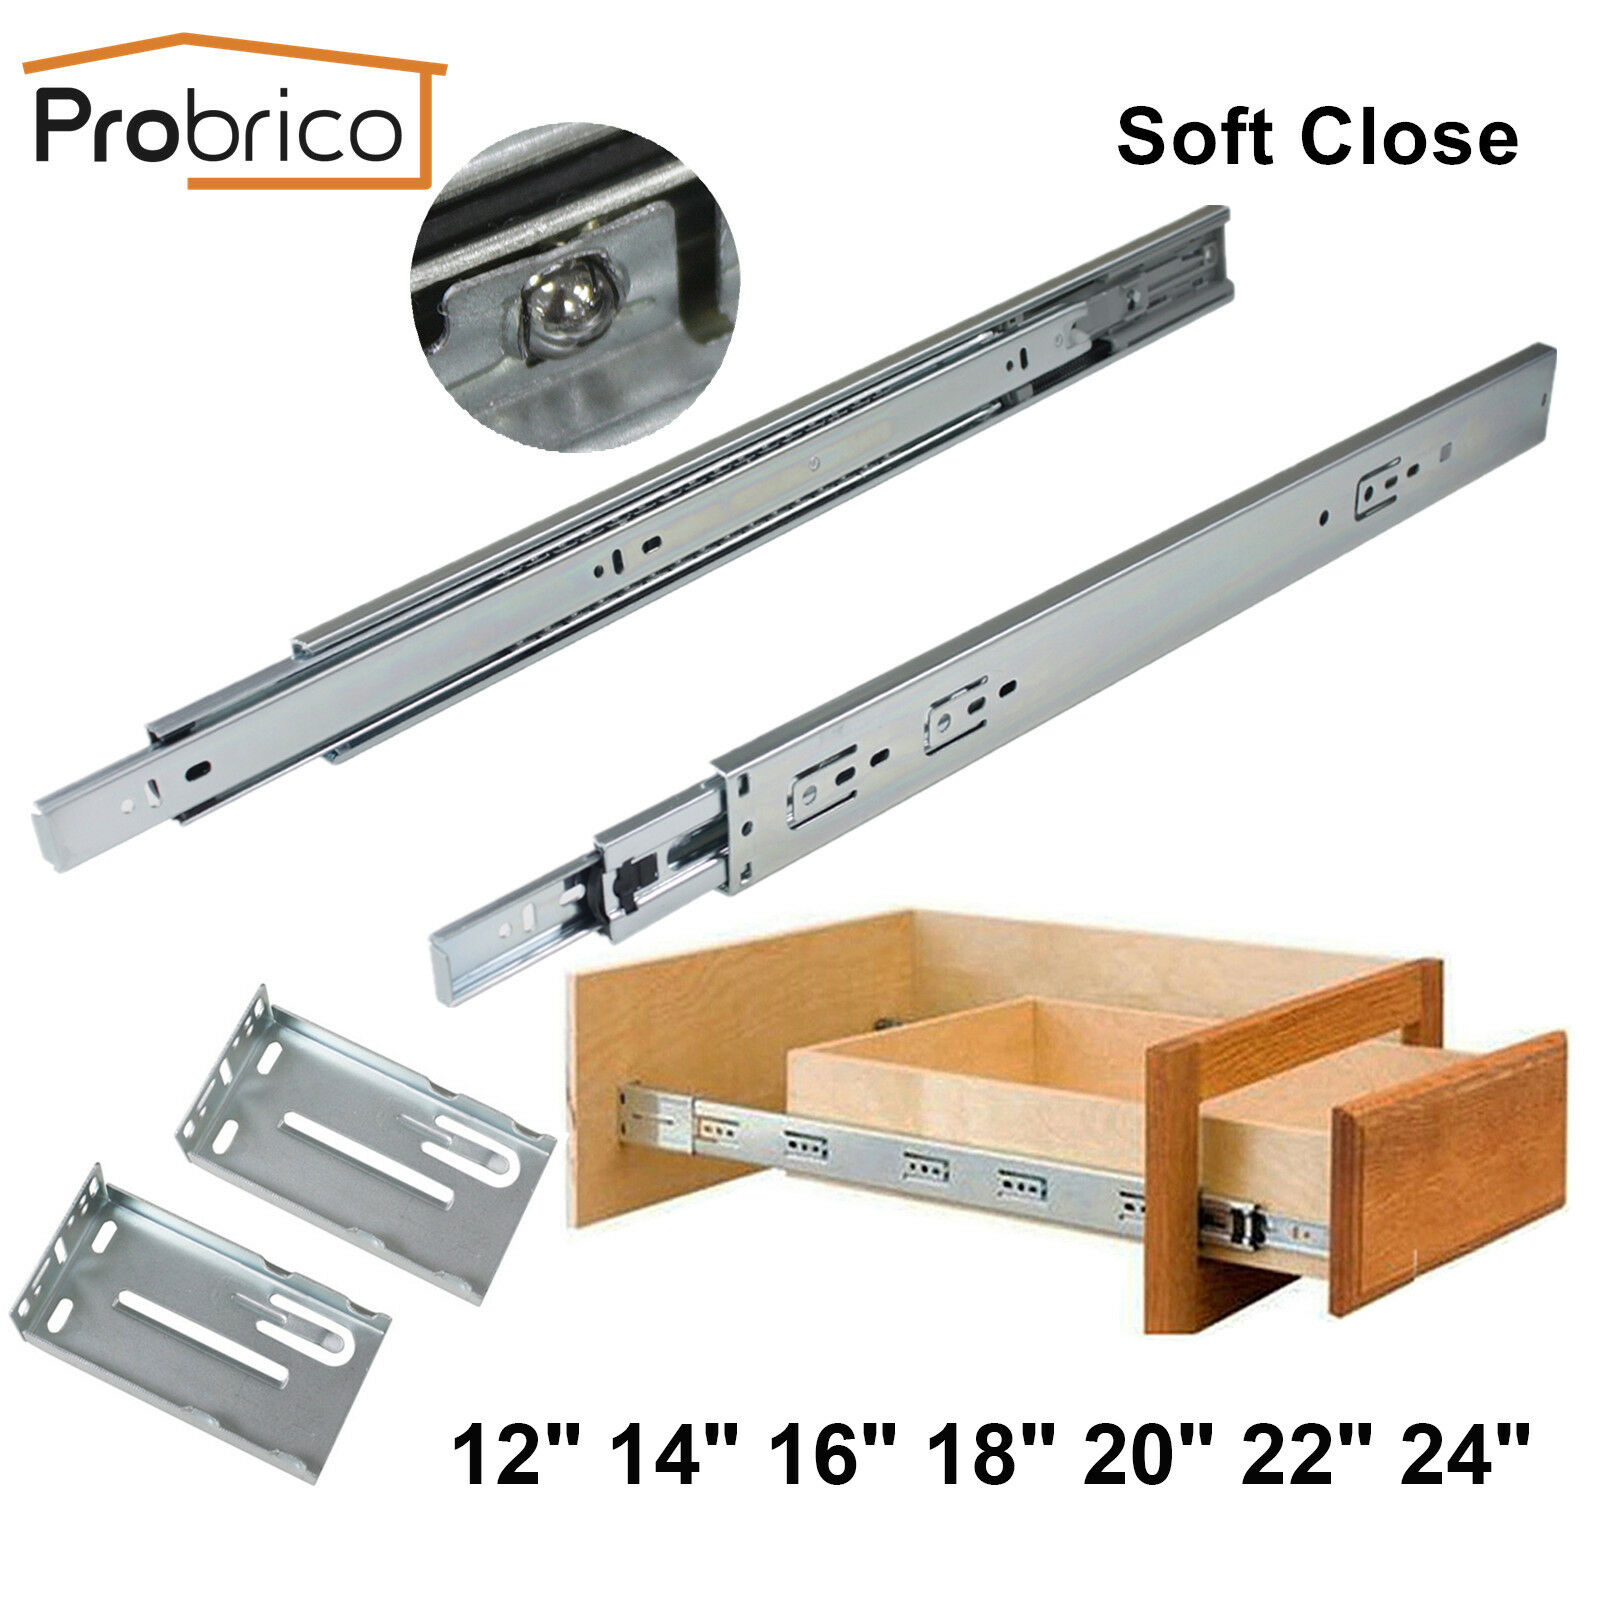 Probrico Soft Close Full Extension Drawer Slides Ball Bearing Side Or Rear Mount